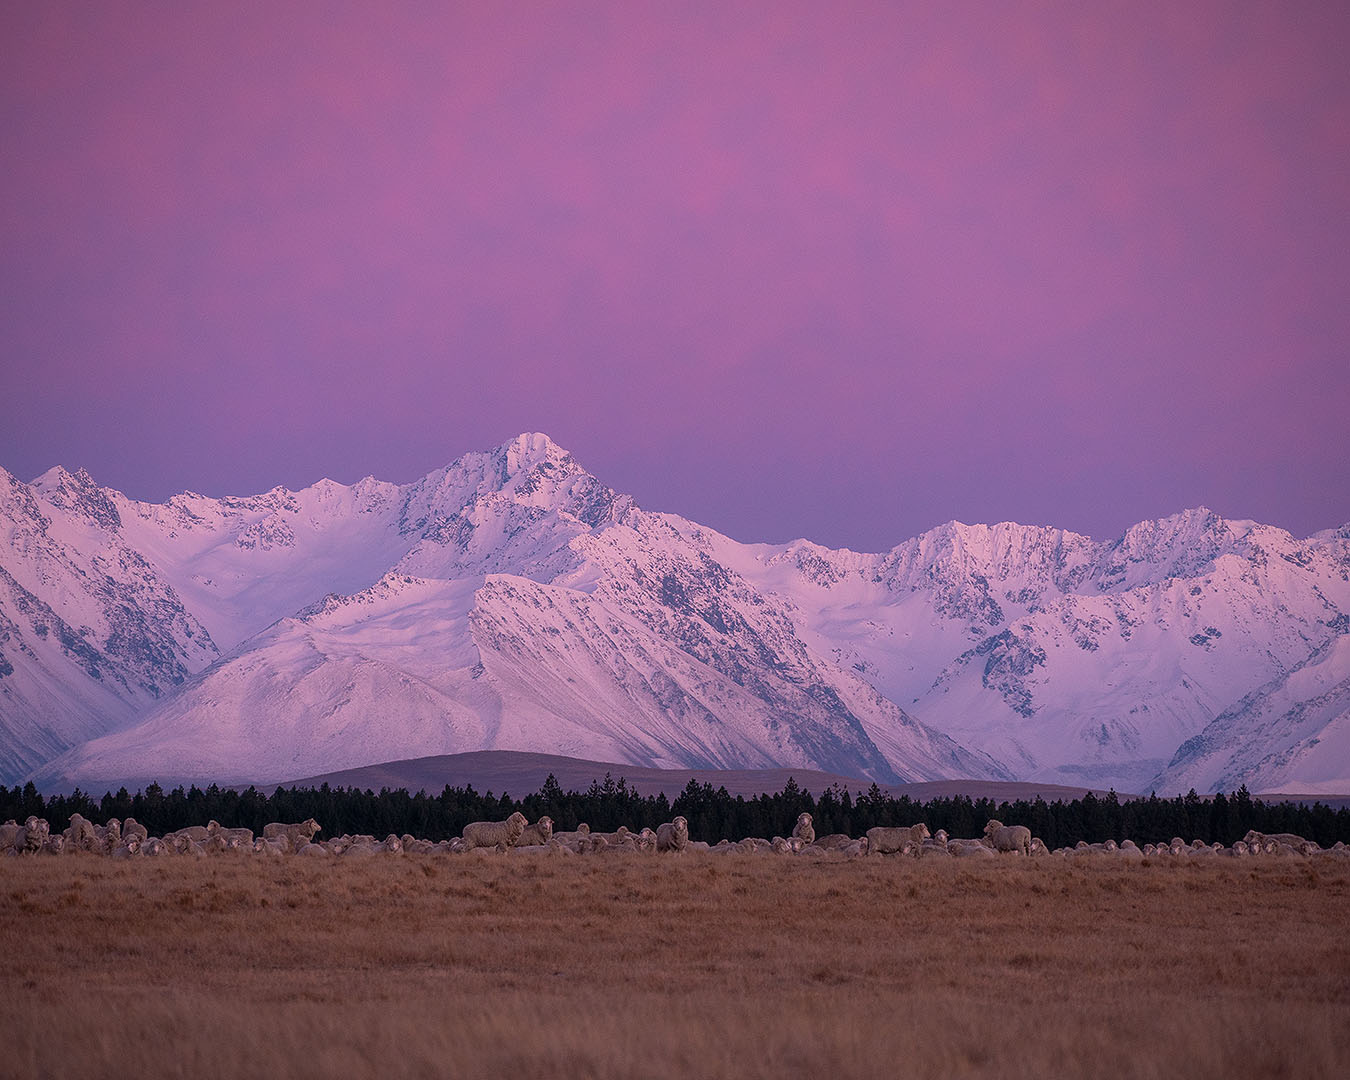 Sheep stand in front of a stunning mountain range at dusk.